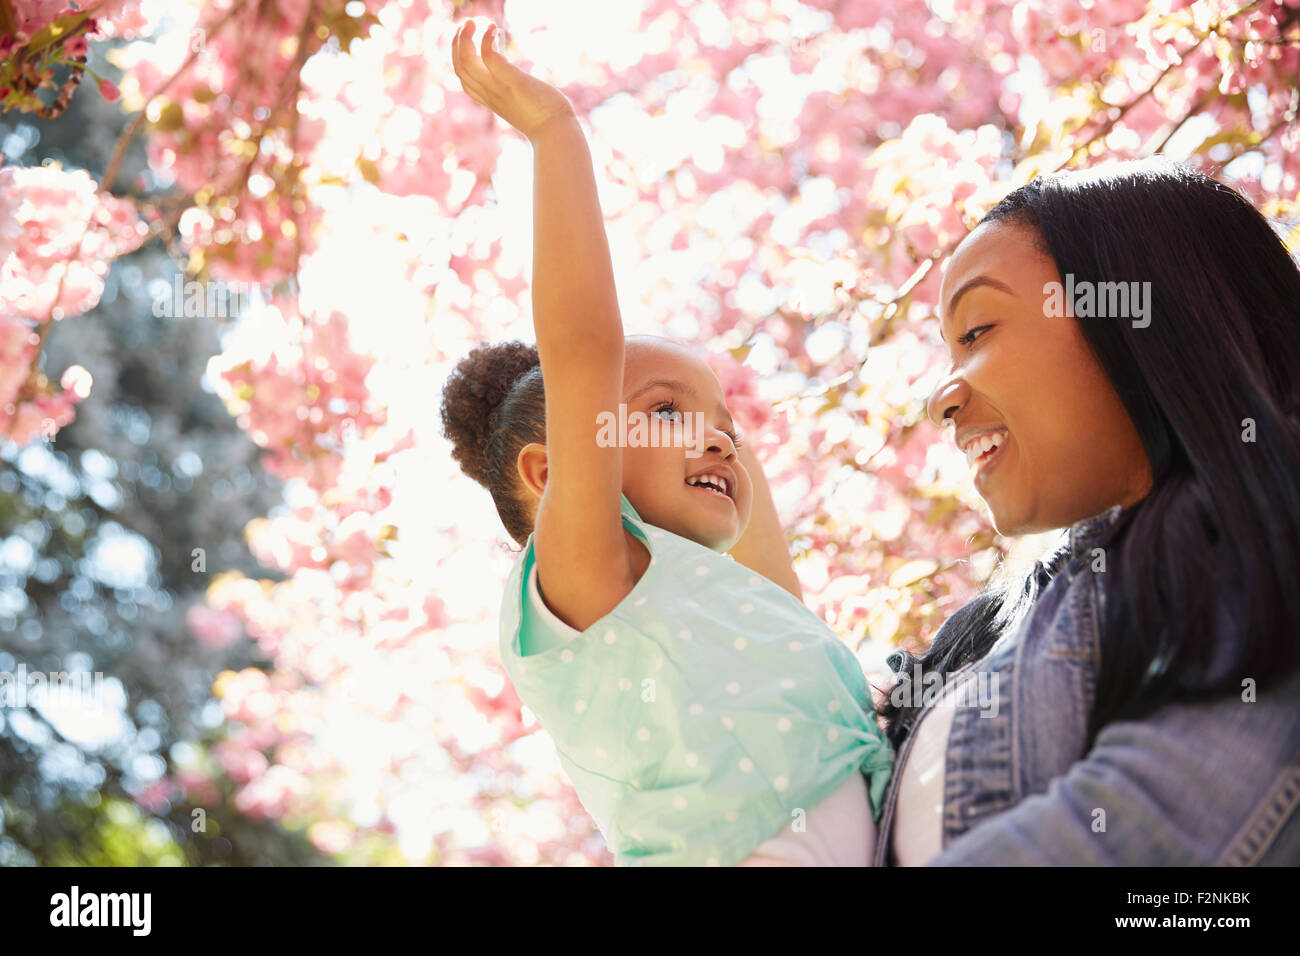 Mother and daughter under flowering tree in park Stock Photo